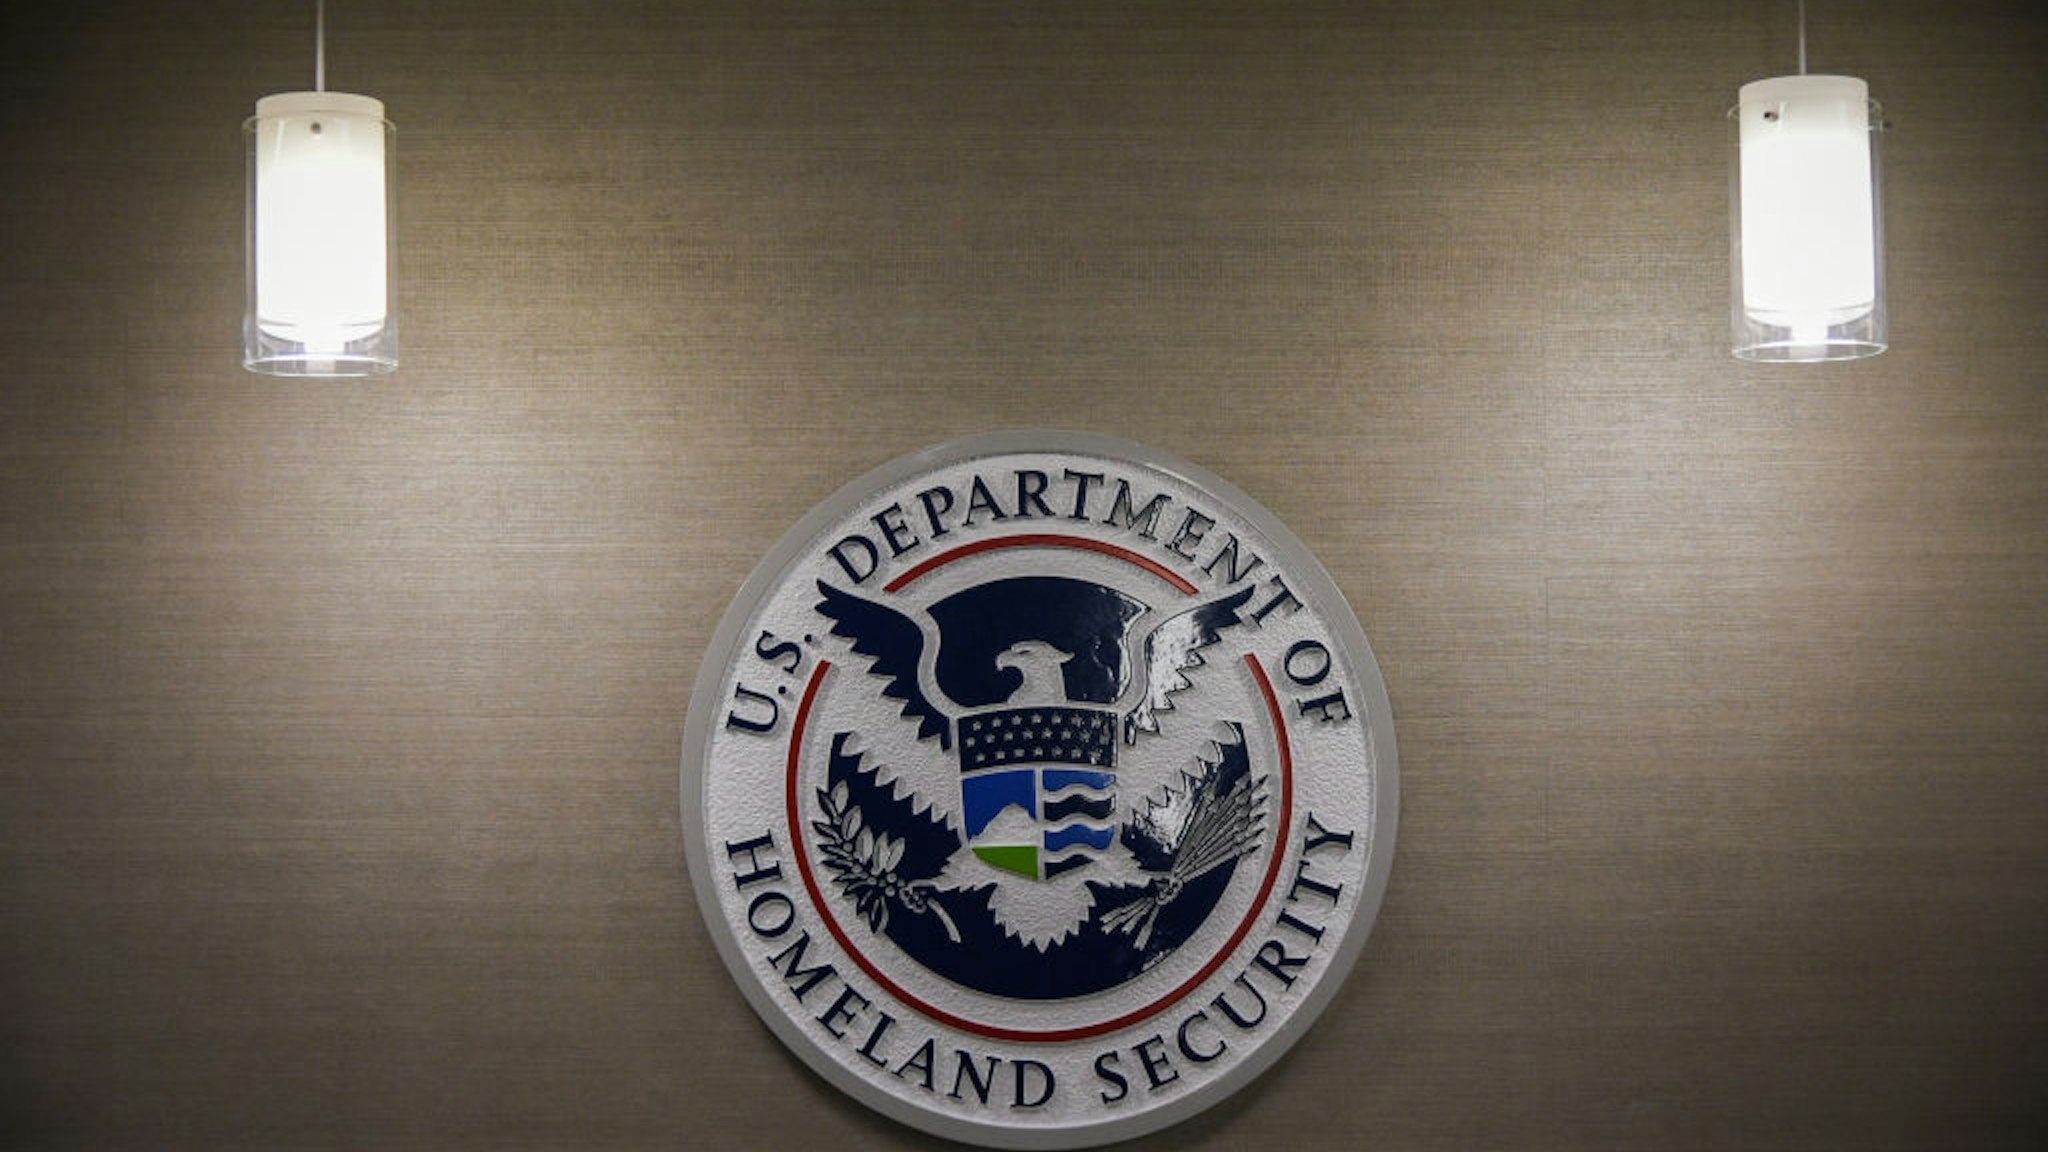 U.S. Department of Homeland Security logo is seen inside press conference room on Thursday, May 11, 2017, at the U.S. Immigration and Customs Enforcement headquarters in Washington, DC.